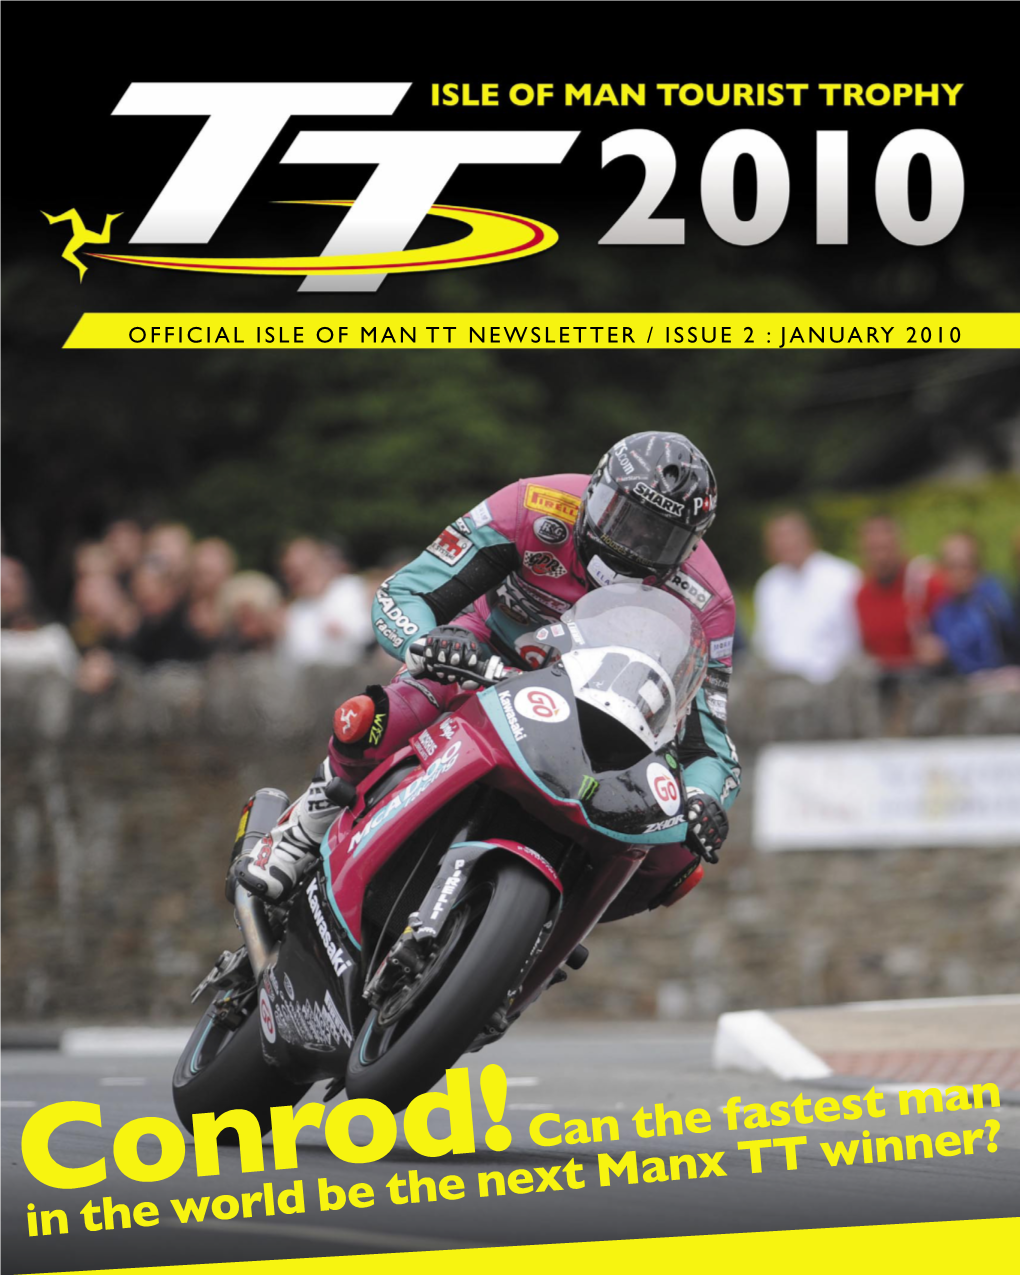 Conrod! Can the Fastest Man in the World Be the Next Manx TT Winner? Welcome